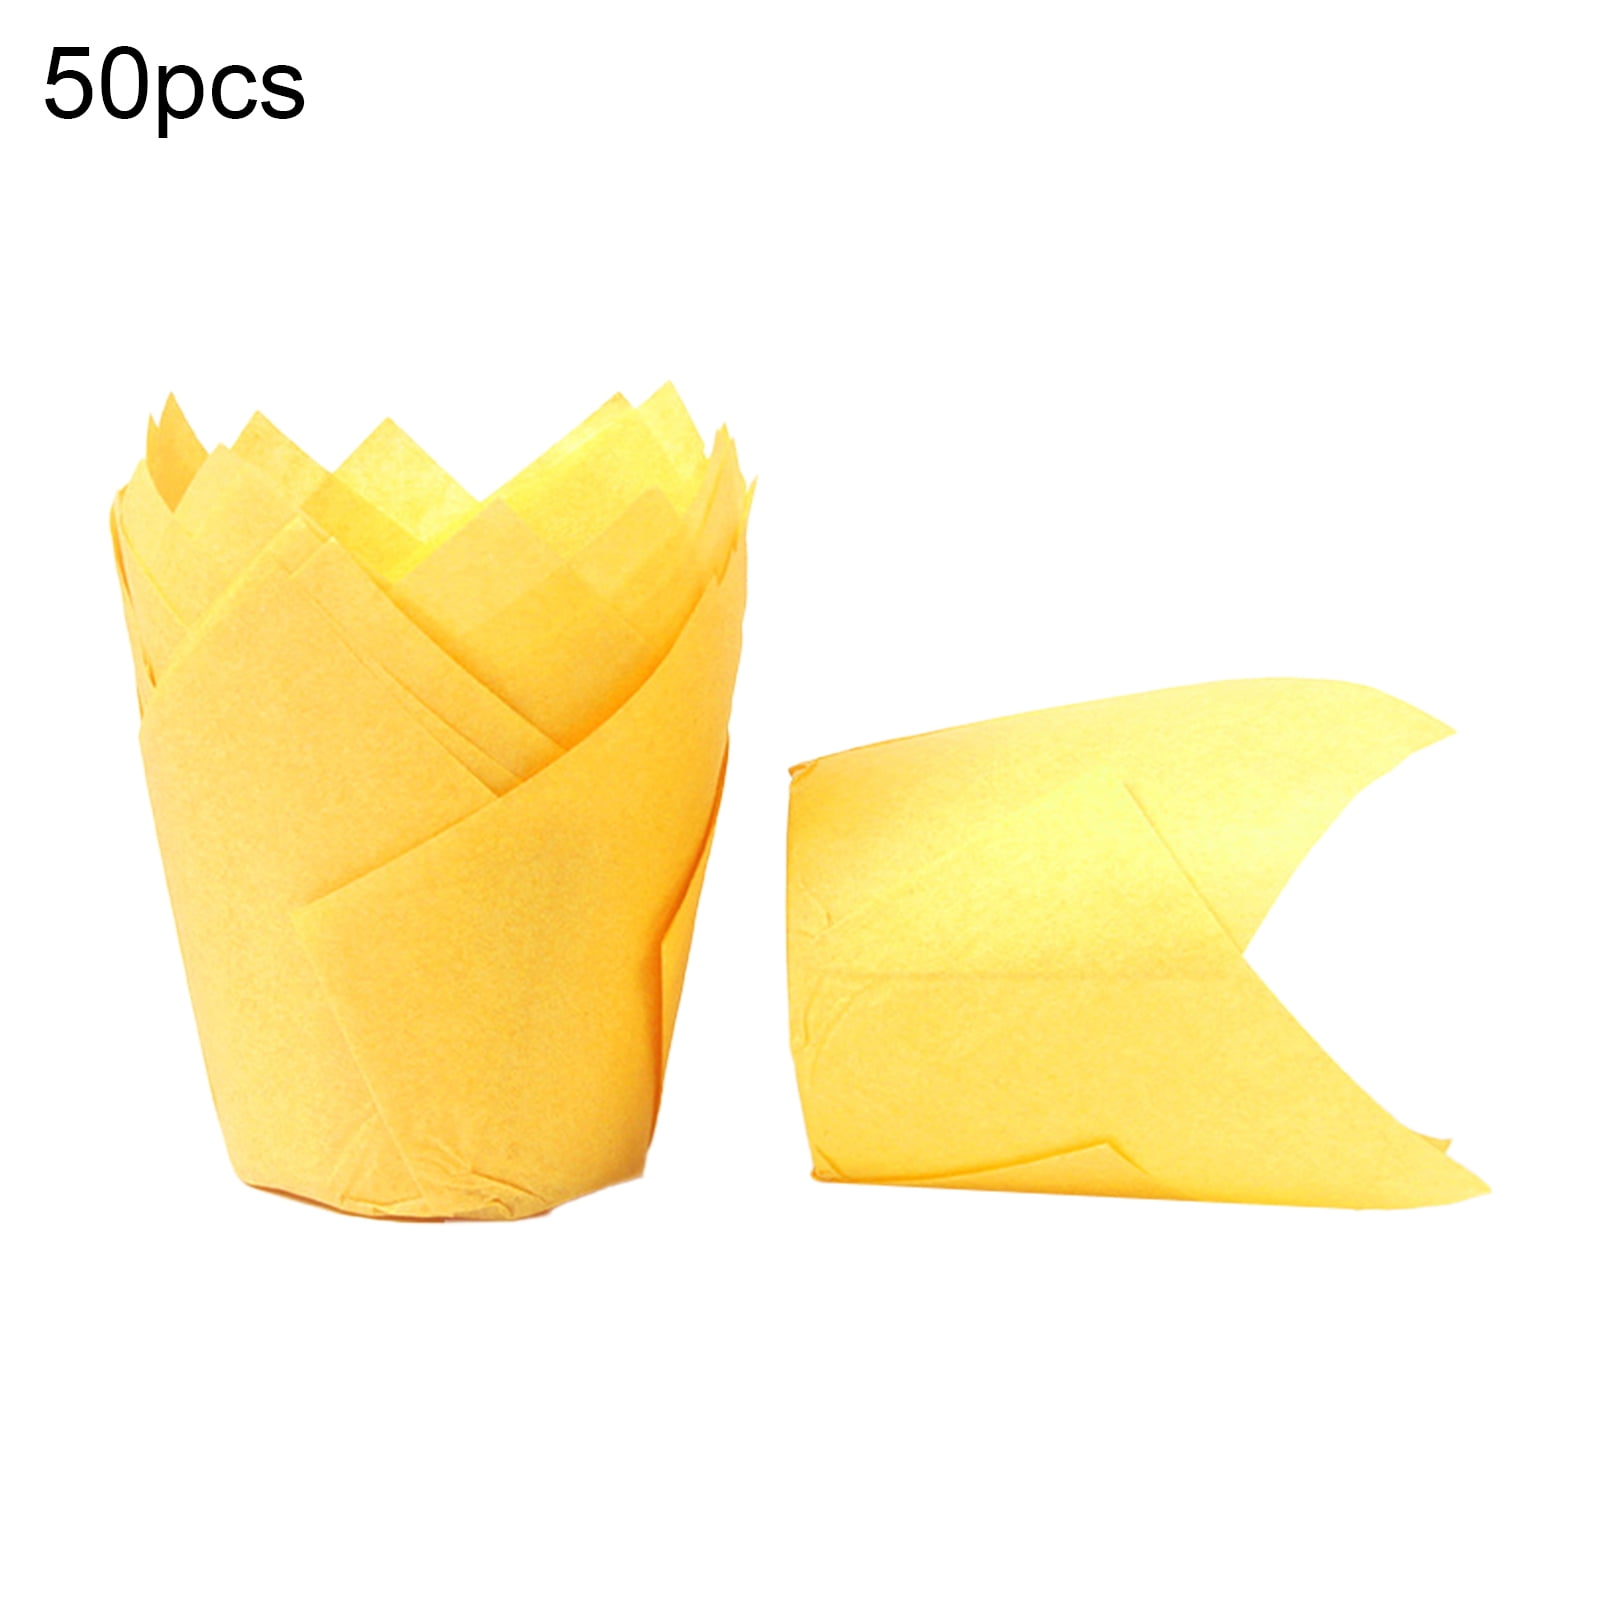 50X Baking Paper Muffin Cup Cupcake Solid Color Wrapper Liners Tulip Case Cake M 